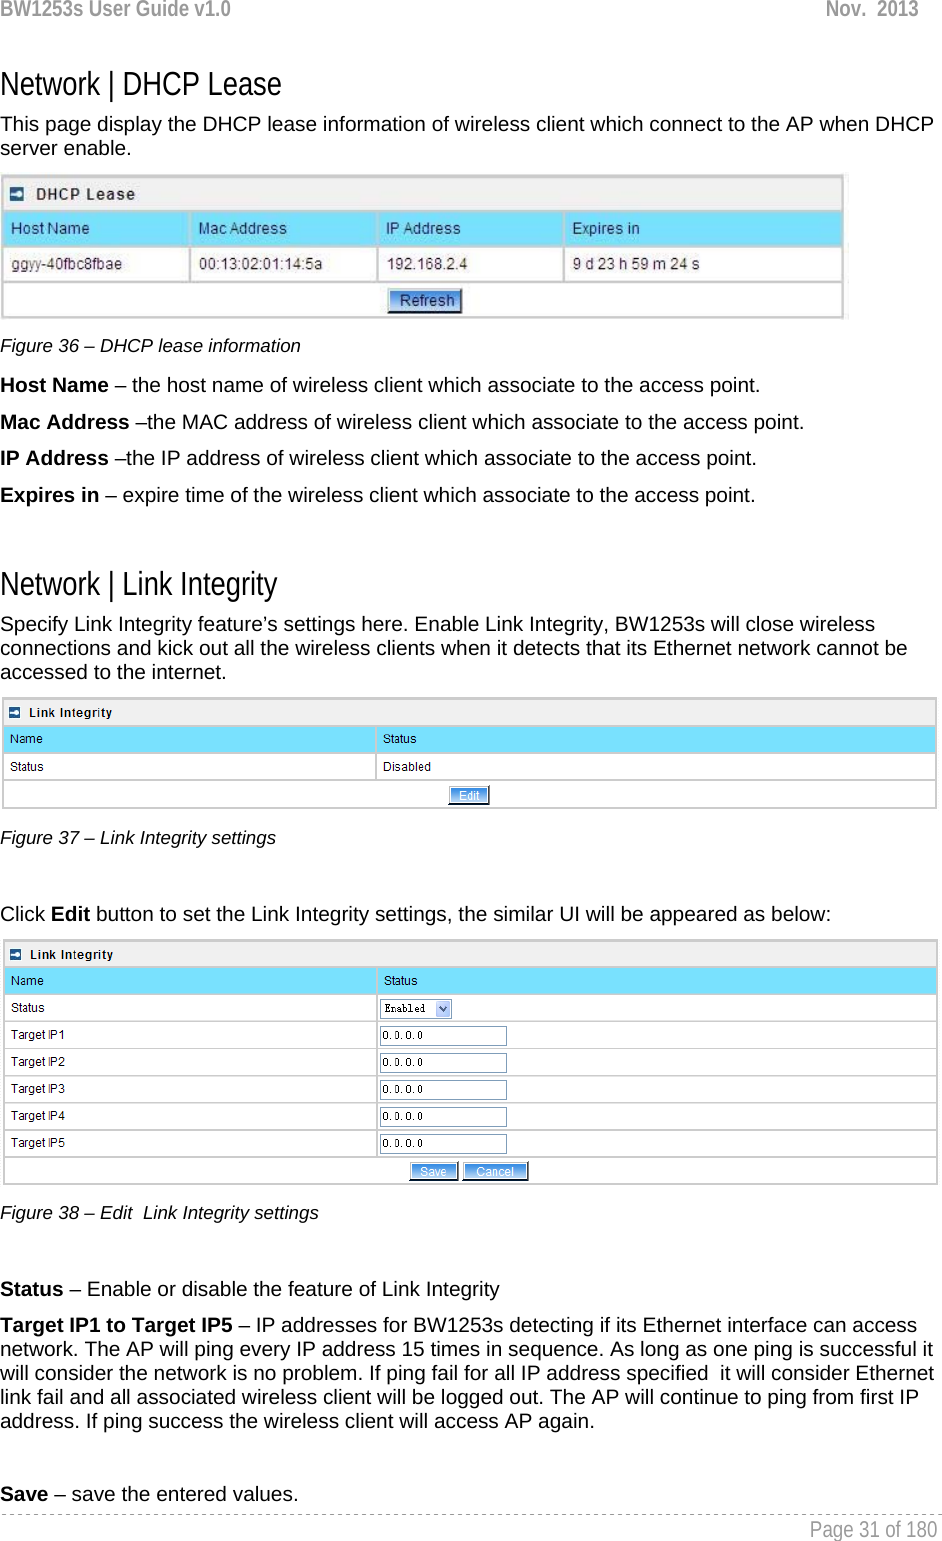 BW1253s User Guide v1.0  Nov.  2013     Page 31 of 180   Network | DHCP Lease This page display the DHCP lease information of wireless client which connect to the AP when DHCP server enable.  Figure 36 – DHCP lease information Host Name – the host name of wireless client which associate to the access point. Mac Address –the MAC address of wireless client which associate to the access point.  IP Address –the IP address of wireless client which associate to the access point. Expires in – expire time of the wireless client which associate to the access point.   Network | Link Integrity Specify Link Integrity feature’s settings here. Enable Link Integrity, BW1253s will close wireless connections and kick out all the wireless clients when it detects that its Ethernet network cannot be accessed to the internet.  Figure 37 – Link Integrity settings  Click Edit button to set the Link Integrity settings, the similar UI will be appeared as below:  Figure 38 – Edit  Link Integrity settings  Status – Enable or disable the feature of Link Integrity Target IP1 to Target IP5 – IP addresses for BW1253s detecting if its Ethernet interface can access  network. The AP will ping every IP address 15 times in sequence. As long as one ping is successful it will consider the network is no problem. If ping fail for all IP address specified  it will consider Ethernet link fail and all associated wireless client will be logged out. The AP will continue to ping from first IP address. If ping success the wireless client will access AP again.  Save – save the entered values. 